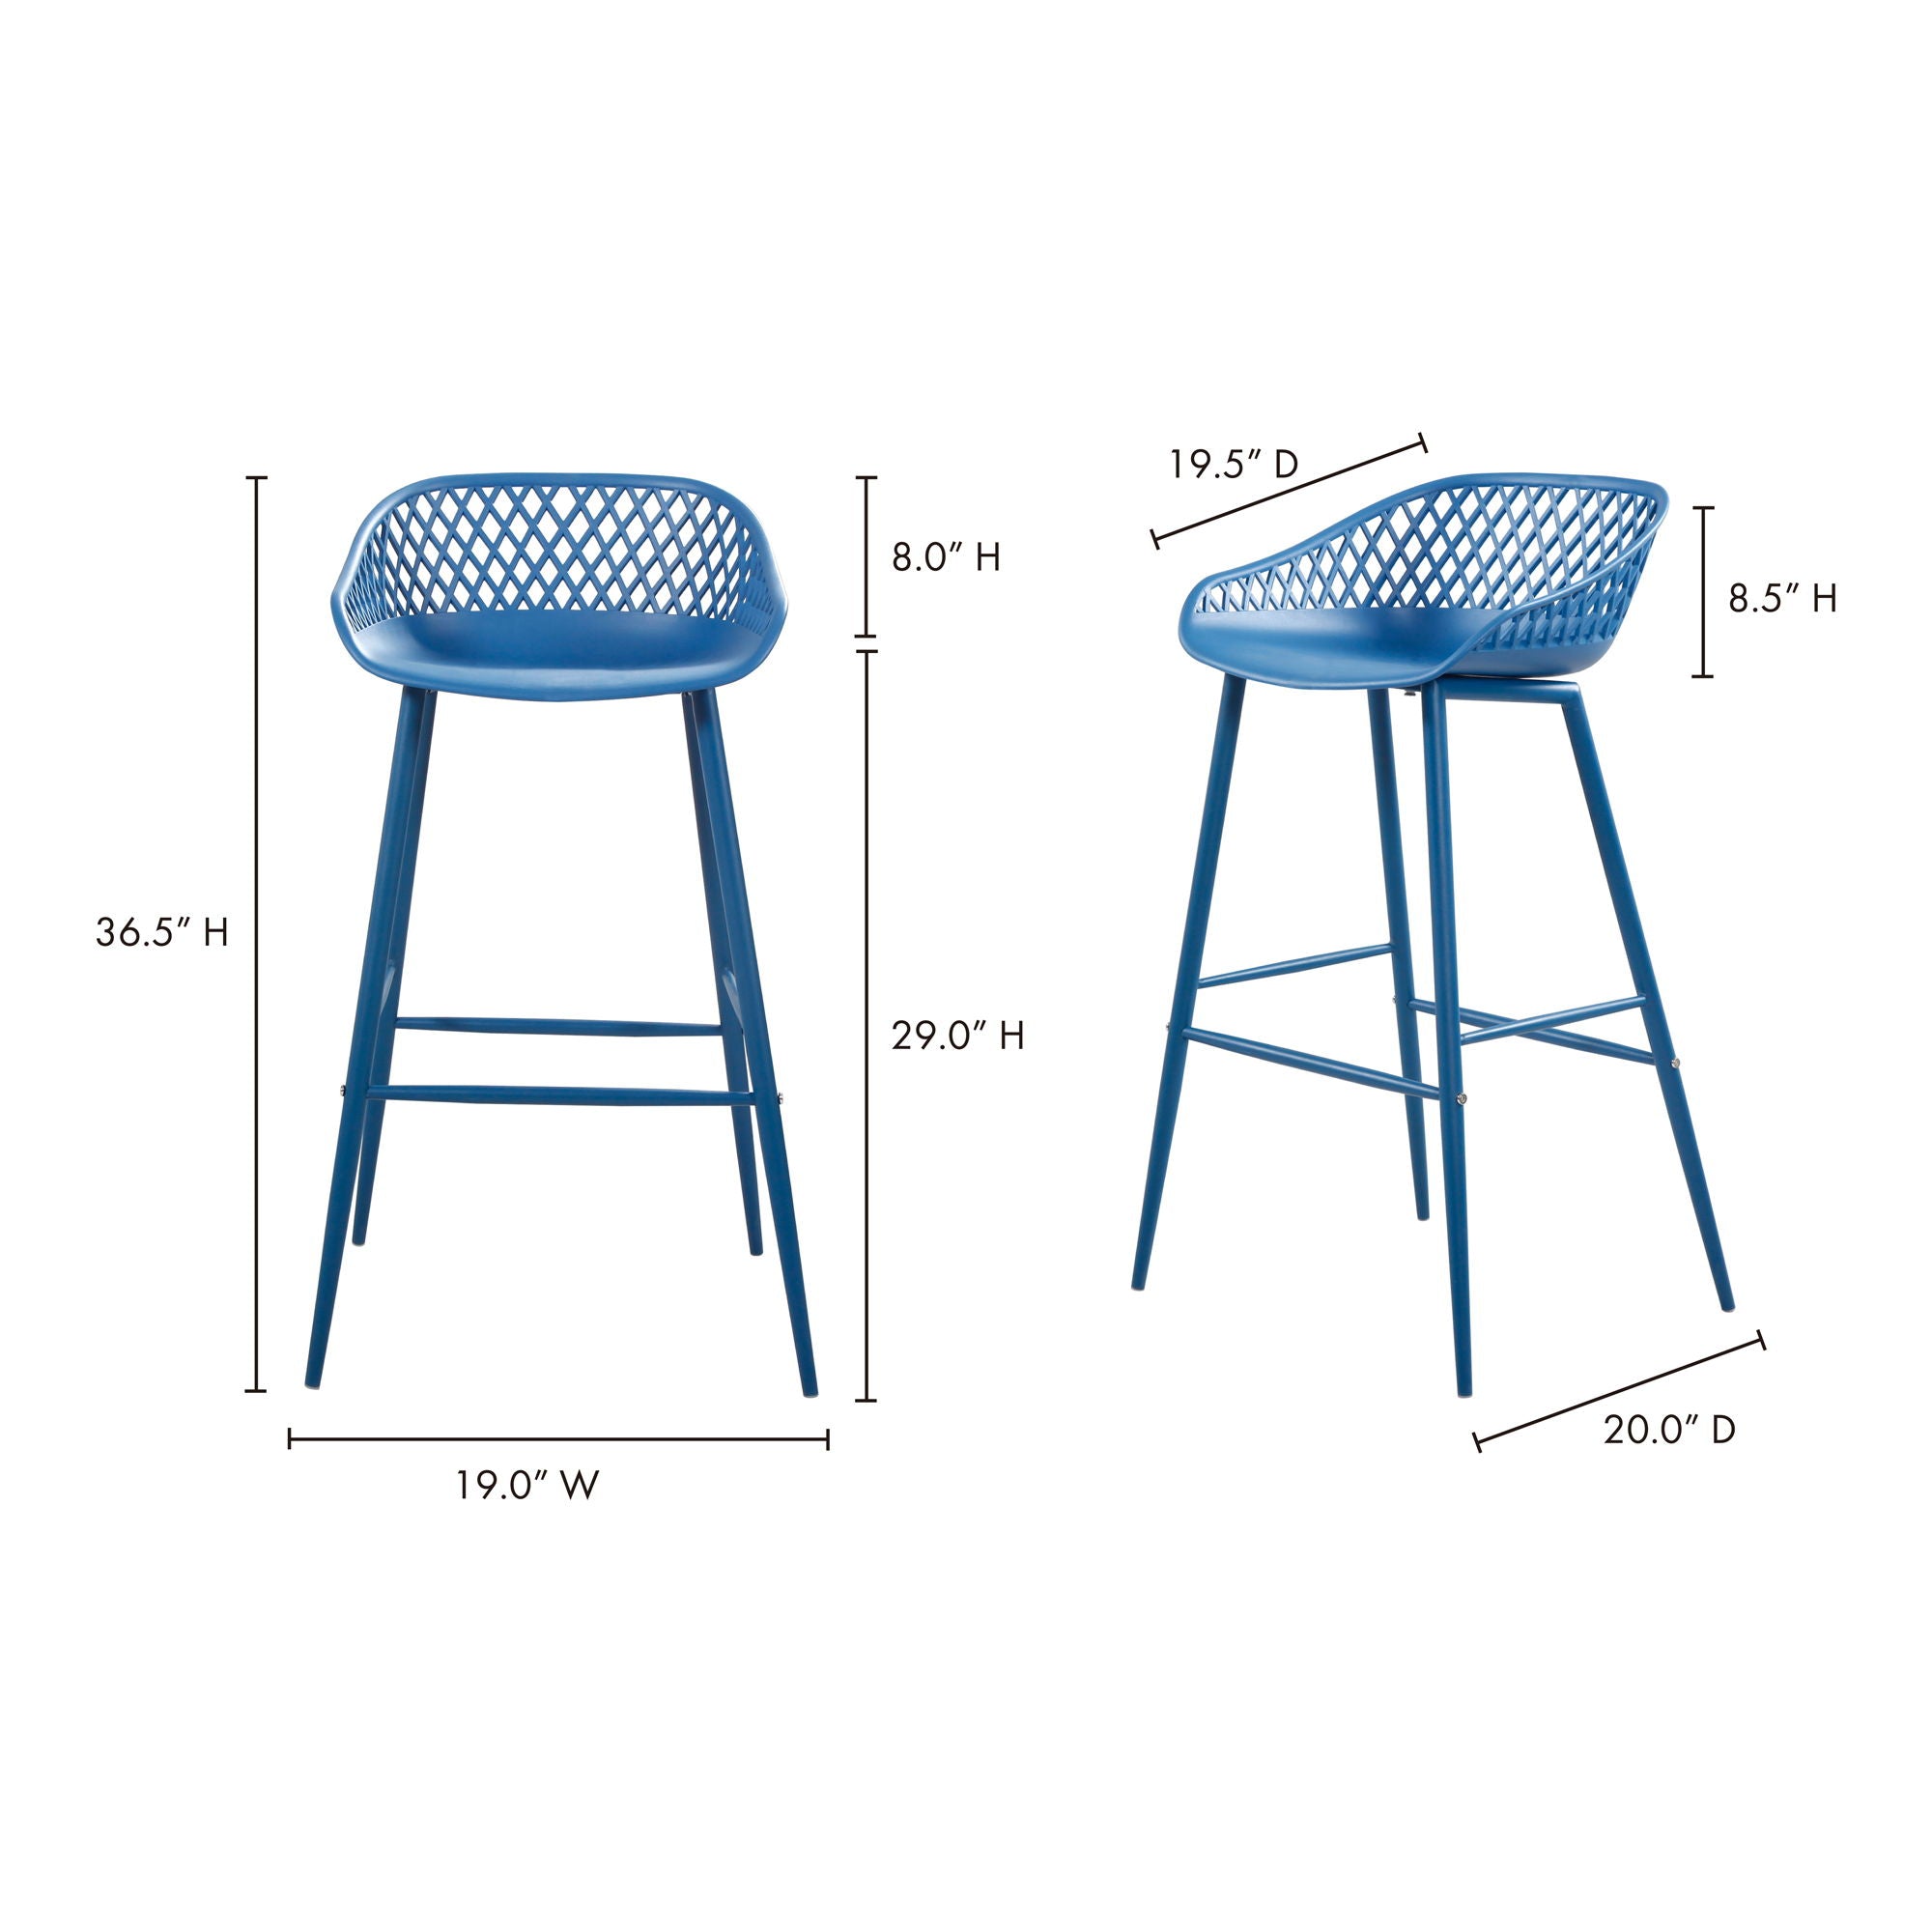 Piazza - Outdoor Barstool - Blue - M2